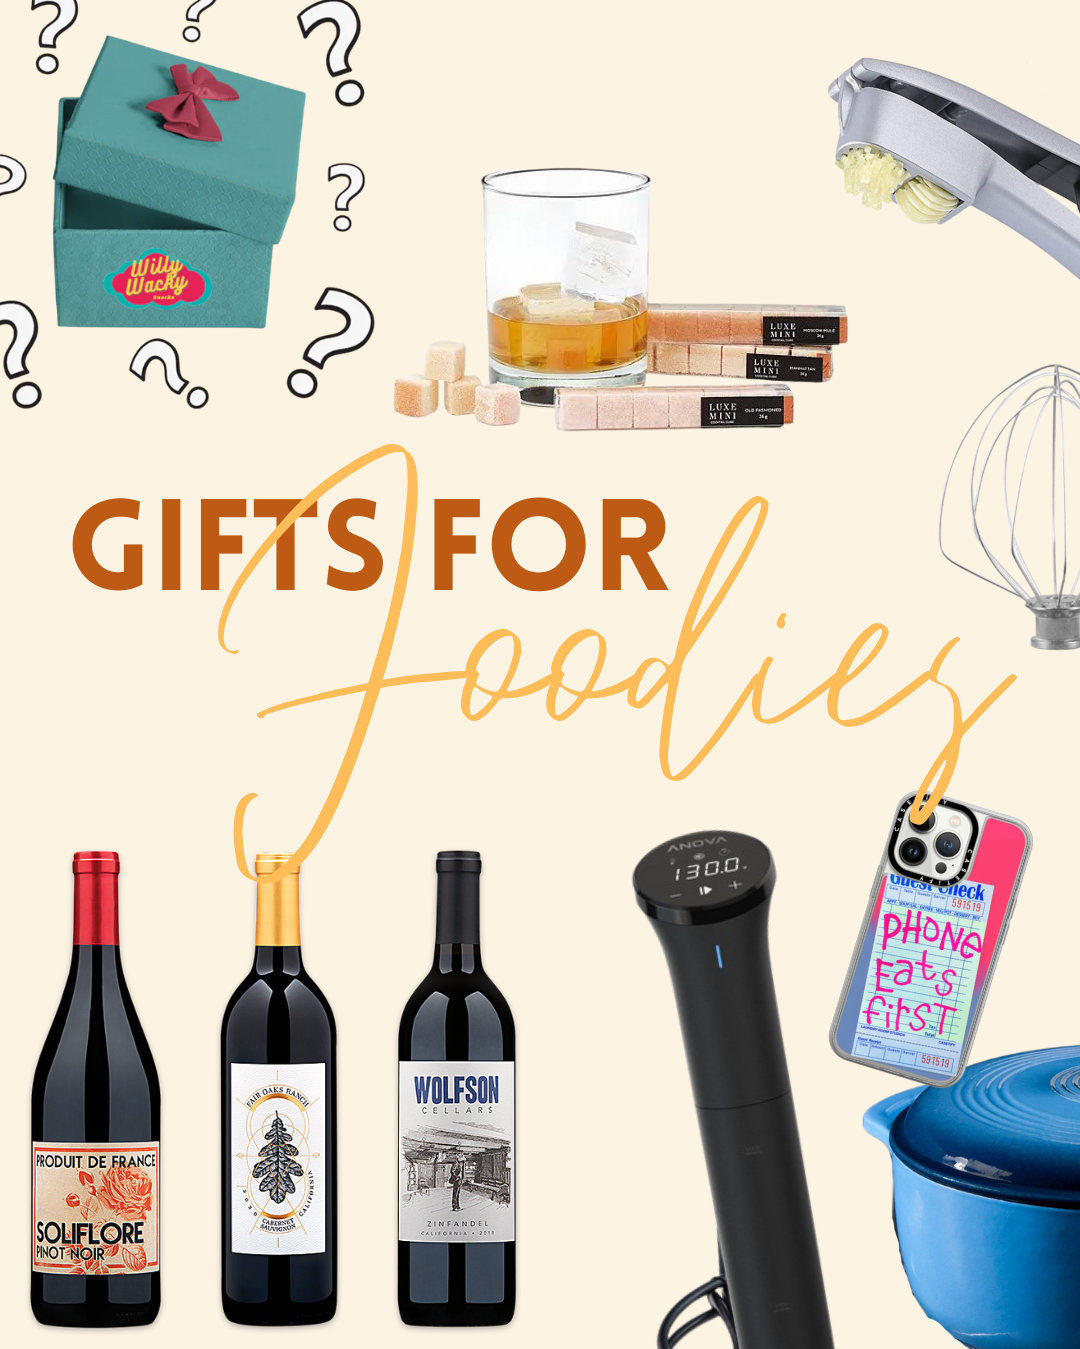 Gifts for Foodies Part 1